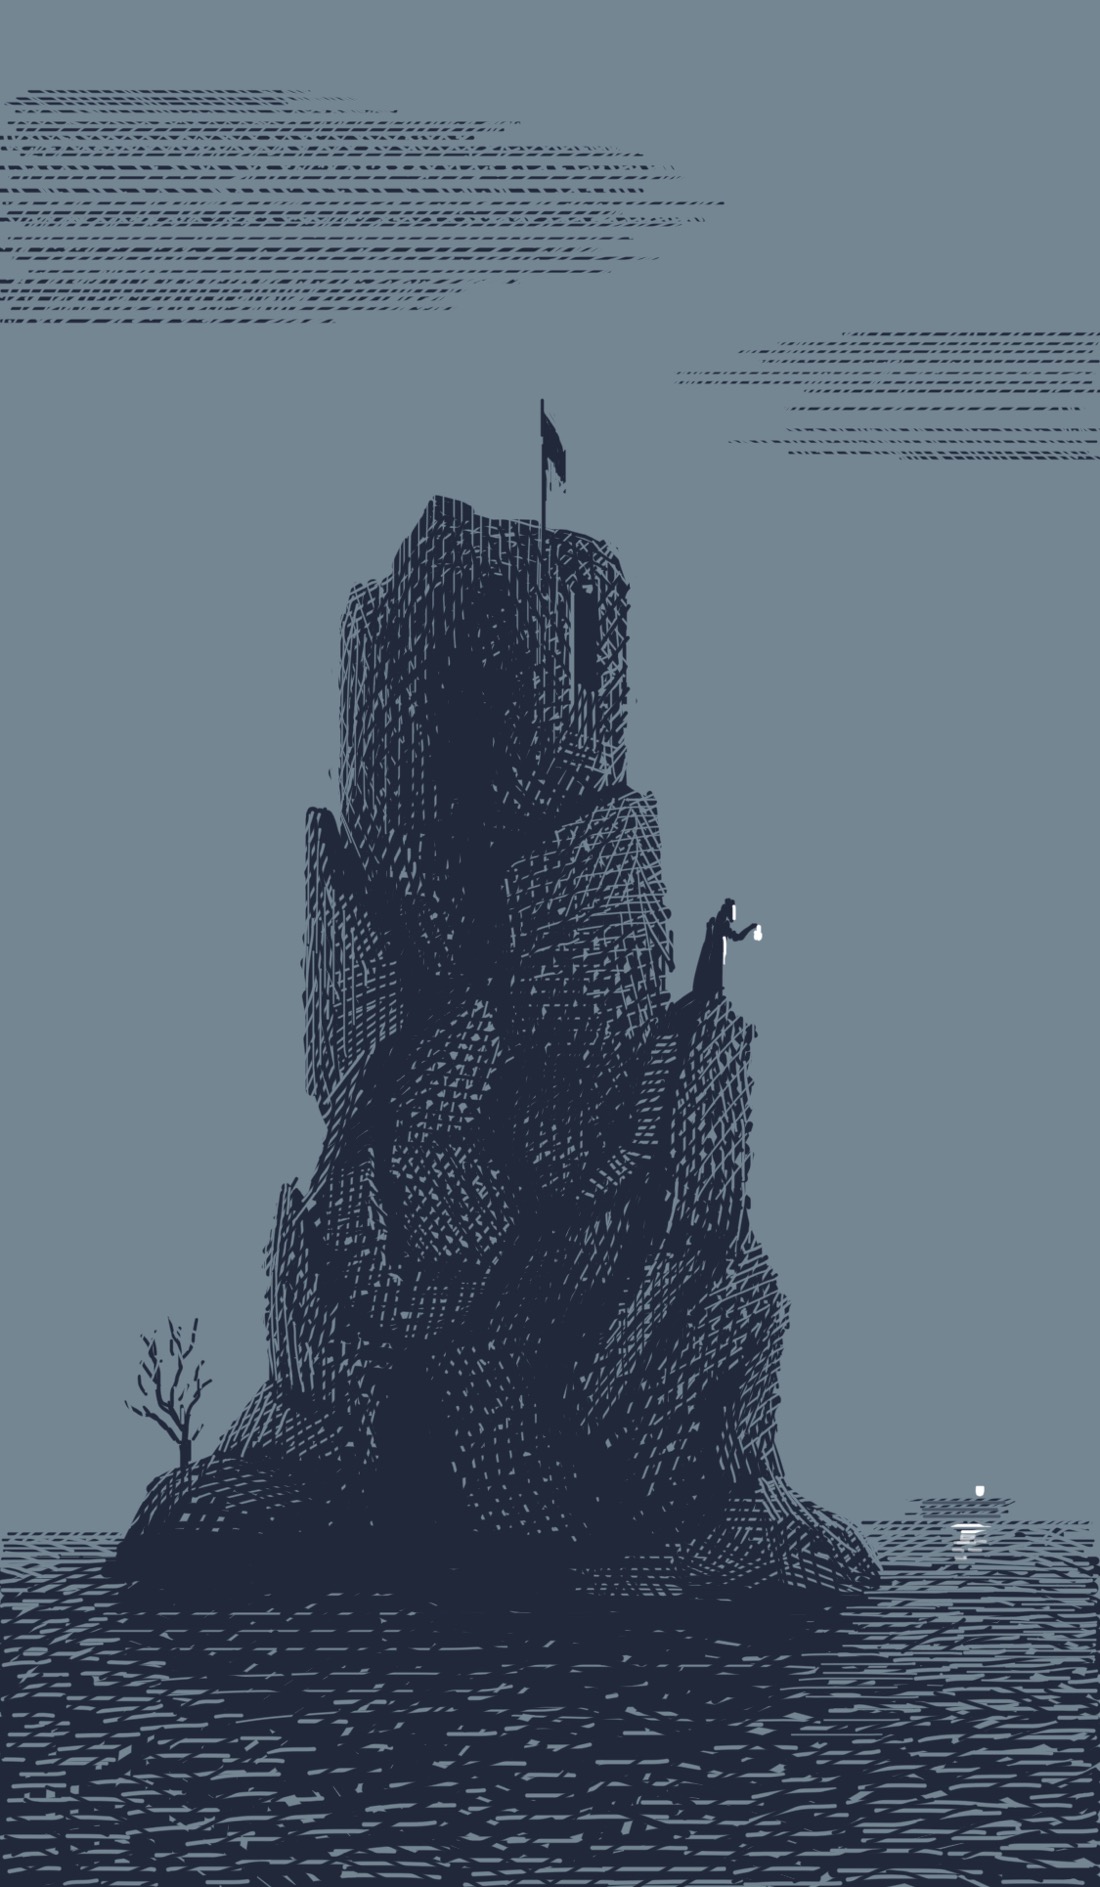 A dark, starless night. A small, barren island in the middle of a large body of water, which is perhaps the ocean, since no other land is visible. Rising straight up from the island is a tall, craggy tower of rock. The bulk of the tower is rough and misshapen, and, while bizarre, still looks naturally formed; the top is an actual, cylindrical turret that appears to be crumbling. There is a dark window on one side of the turret, and a limp flag at the very top. About halfway up the tower, standing on one of the more prominent crags, is a dark figure holding out a blazing white lantern. Far out on the water is another white light from a ship. The figure and the ship seem to be signaling each other. Something is afoot.